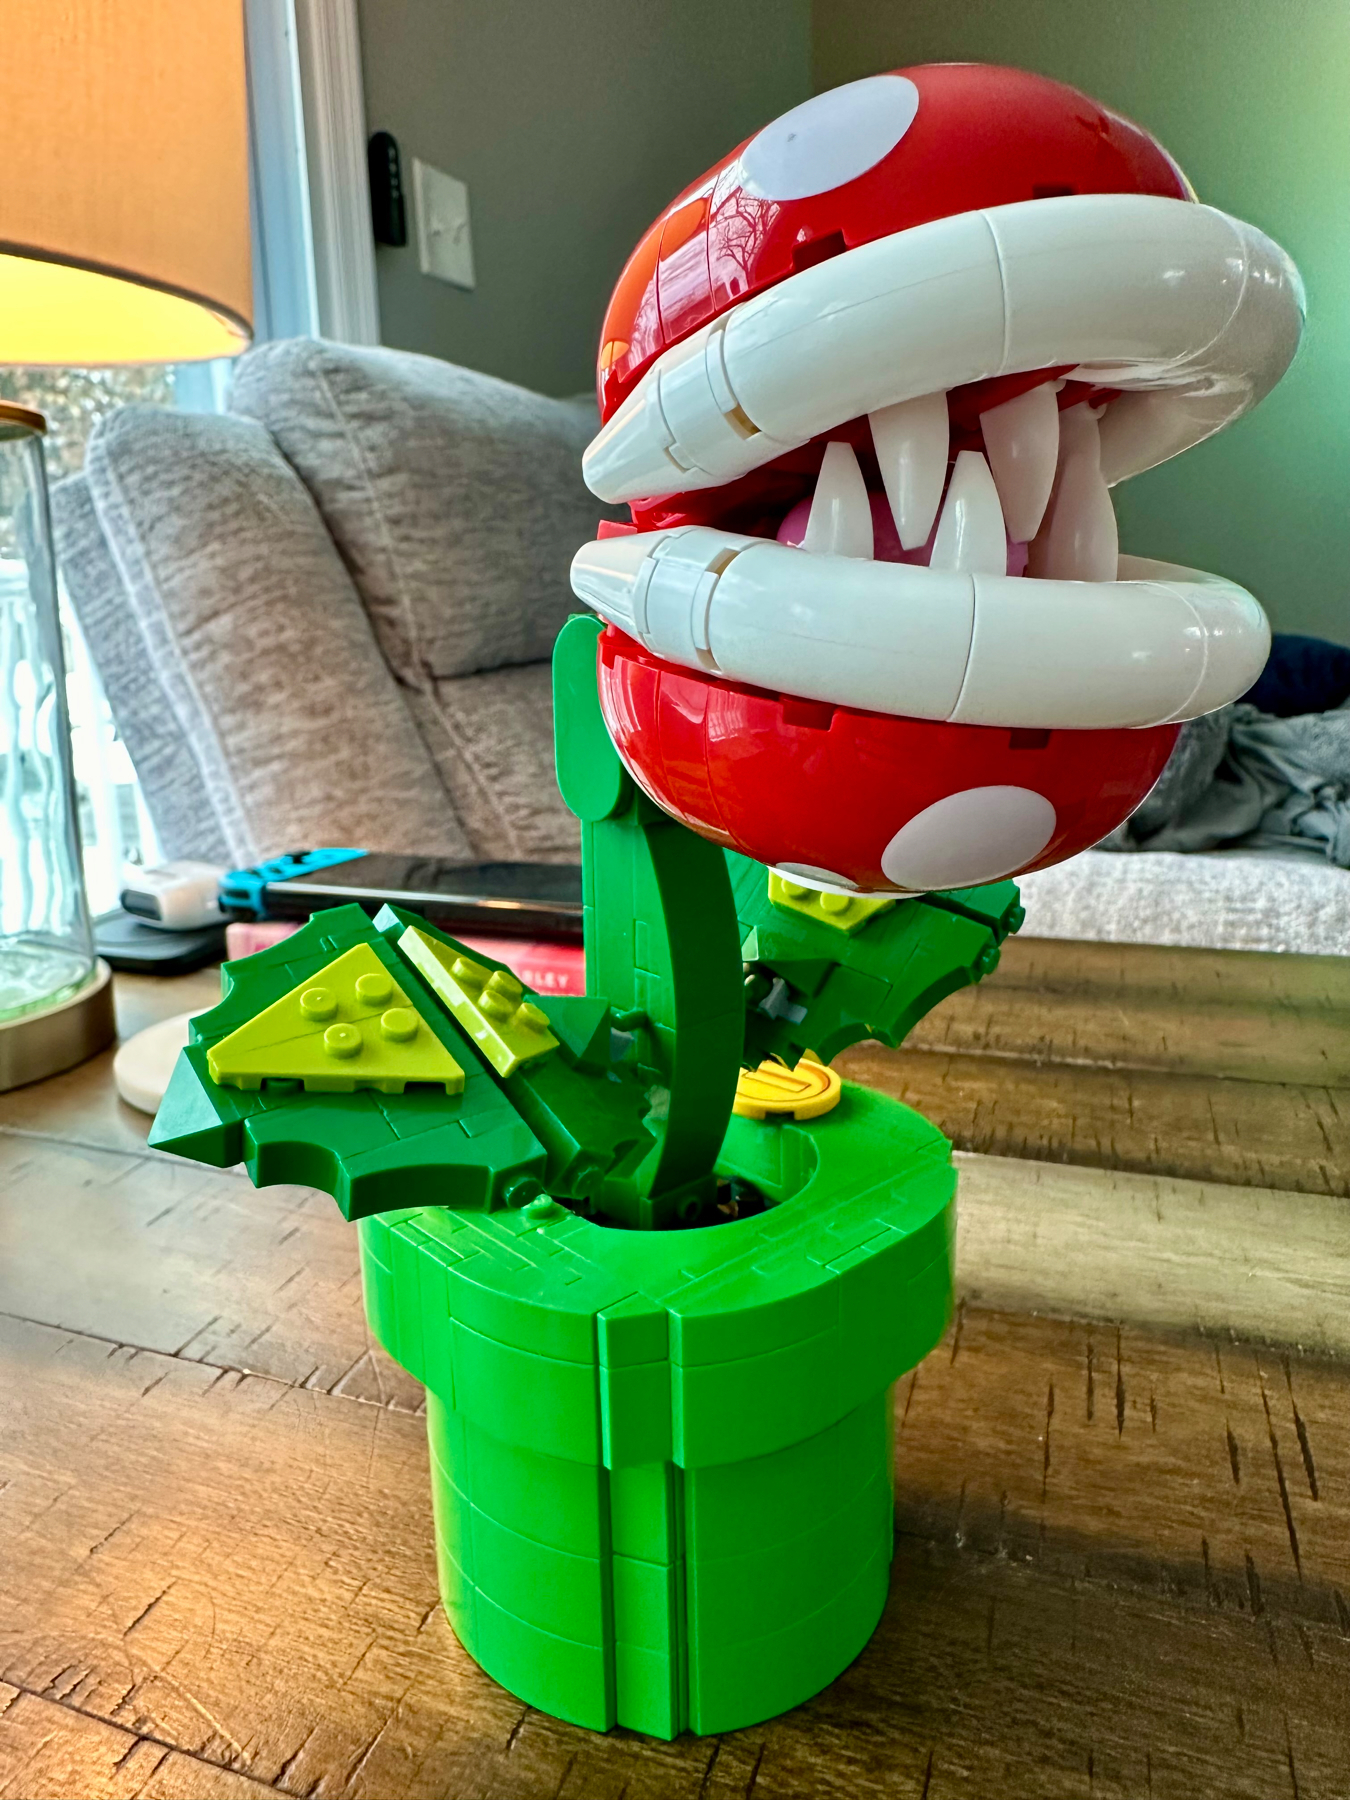 A LEGO model of a Piranha Plant from the Super Mario series, with a red head, white mouth, sharp white teeth, set in a green warp pipe.